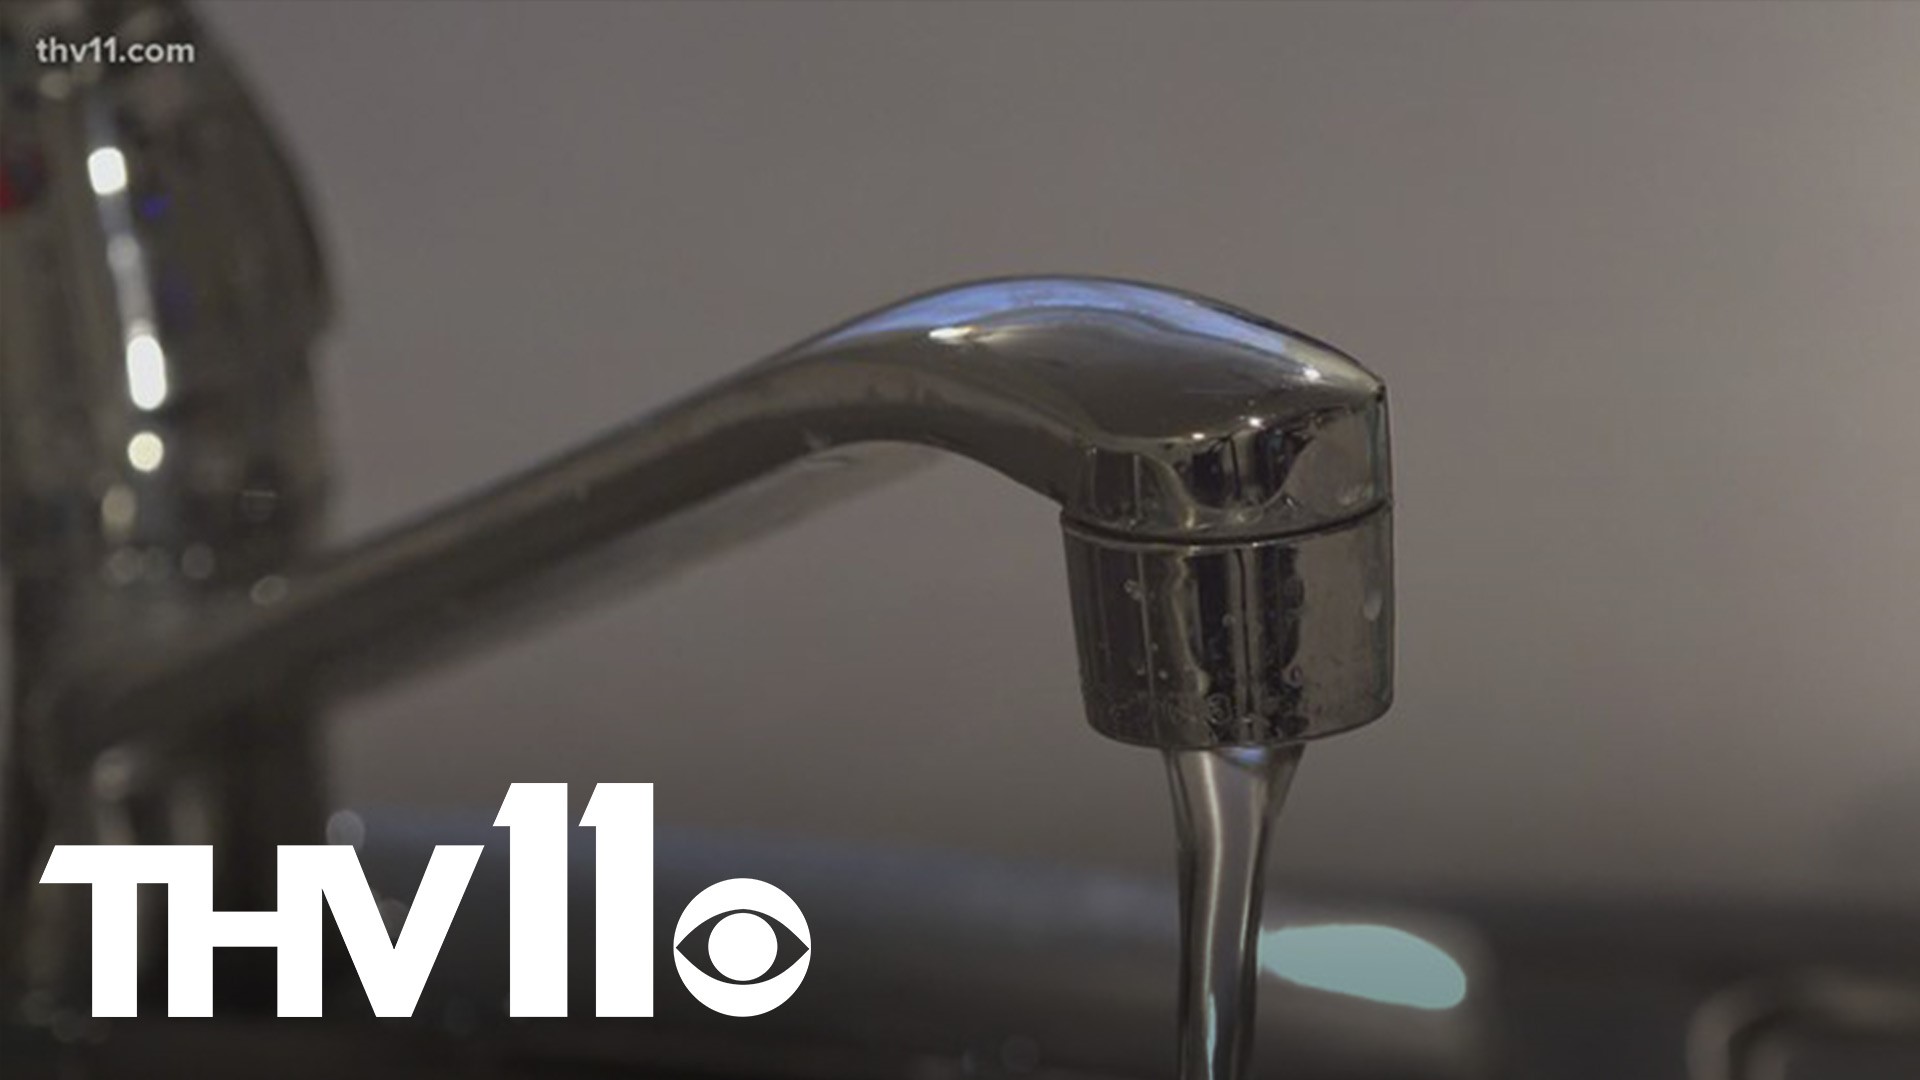 The city is still refilling its water tanks, but the process means a boil order will be in effect all week.